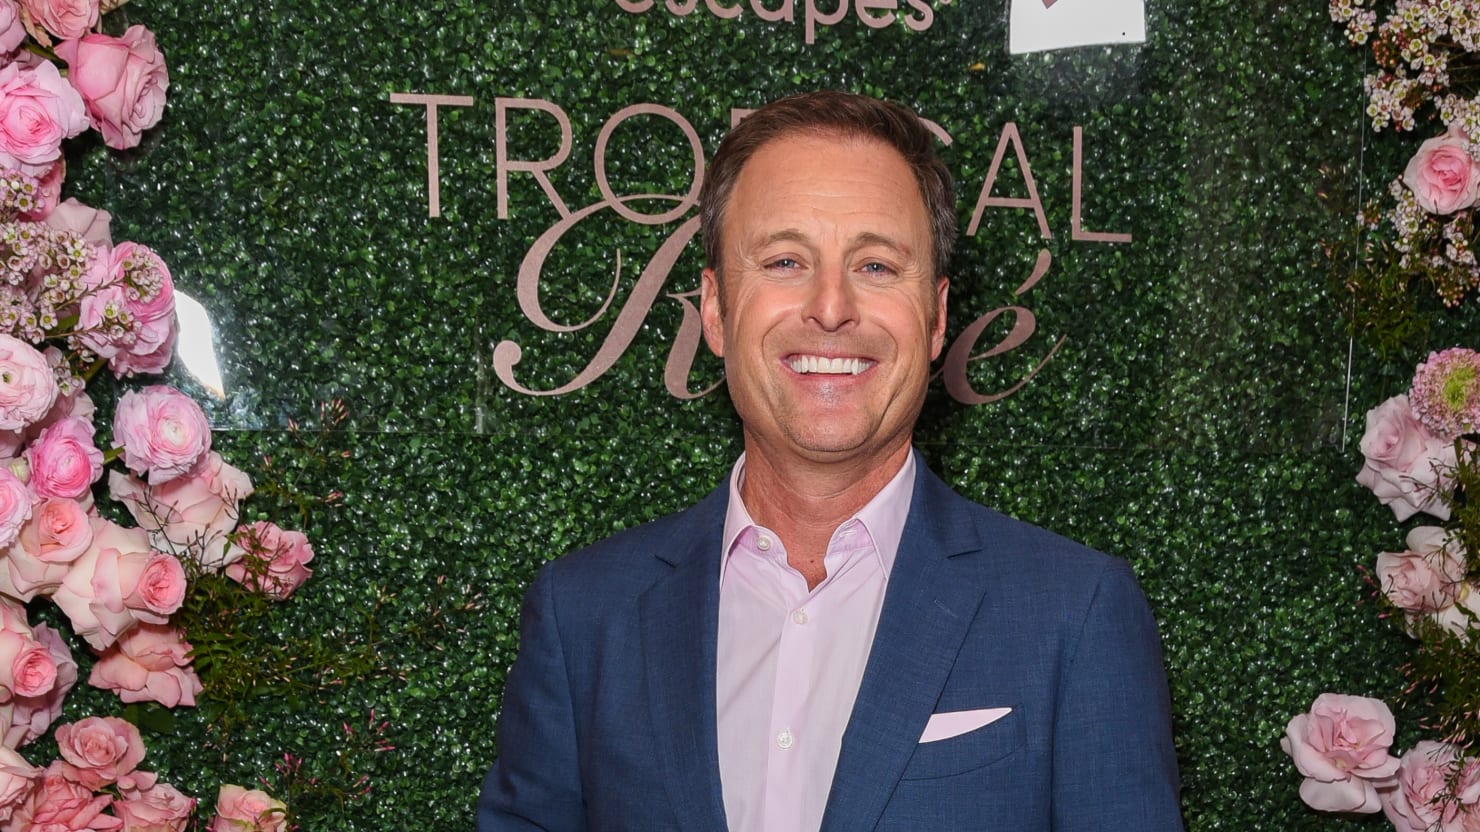 ‘The Bachelor’ features Chris Harrison for ‘Step Aside’ After Racism Furor